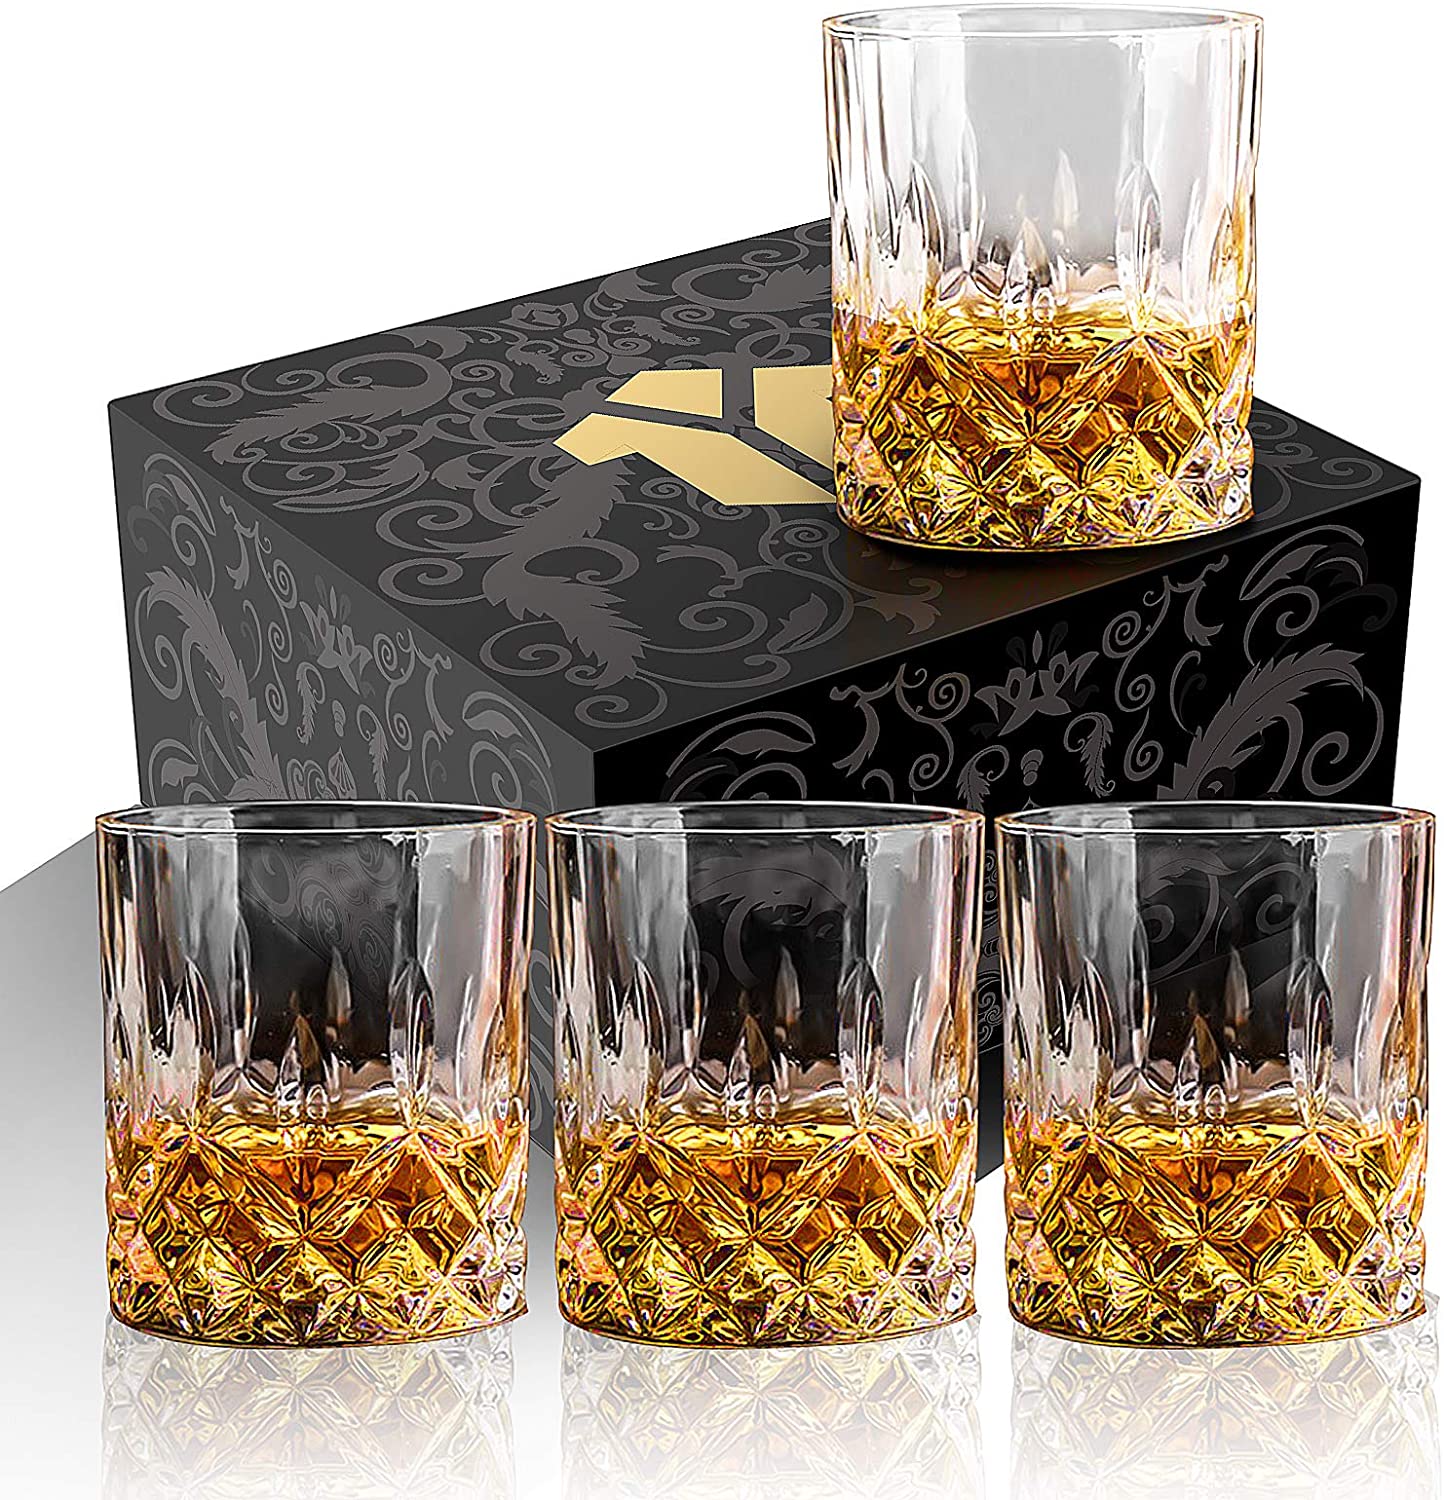 Good quality Granite Cooking Stone - Whiskey Stones Gift Set  Scotch Bourbon Glasses lead free crystal glass by gift box  – Shunstone